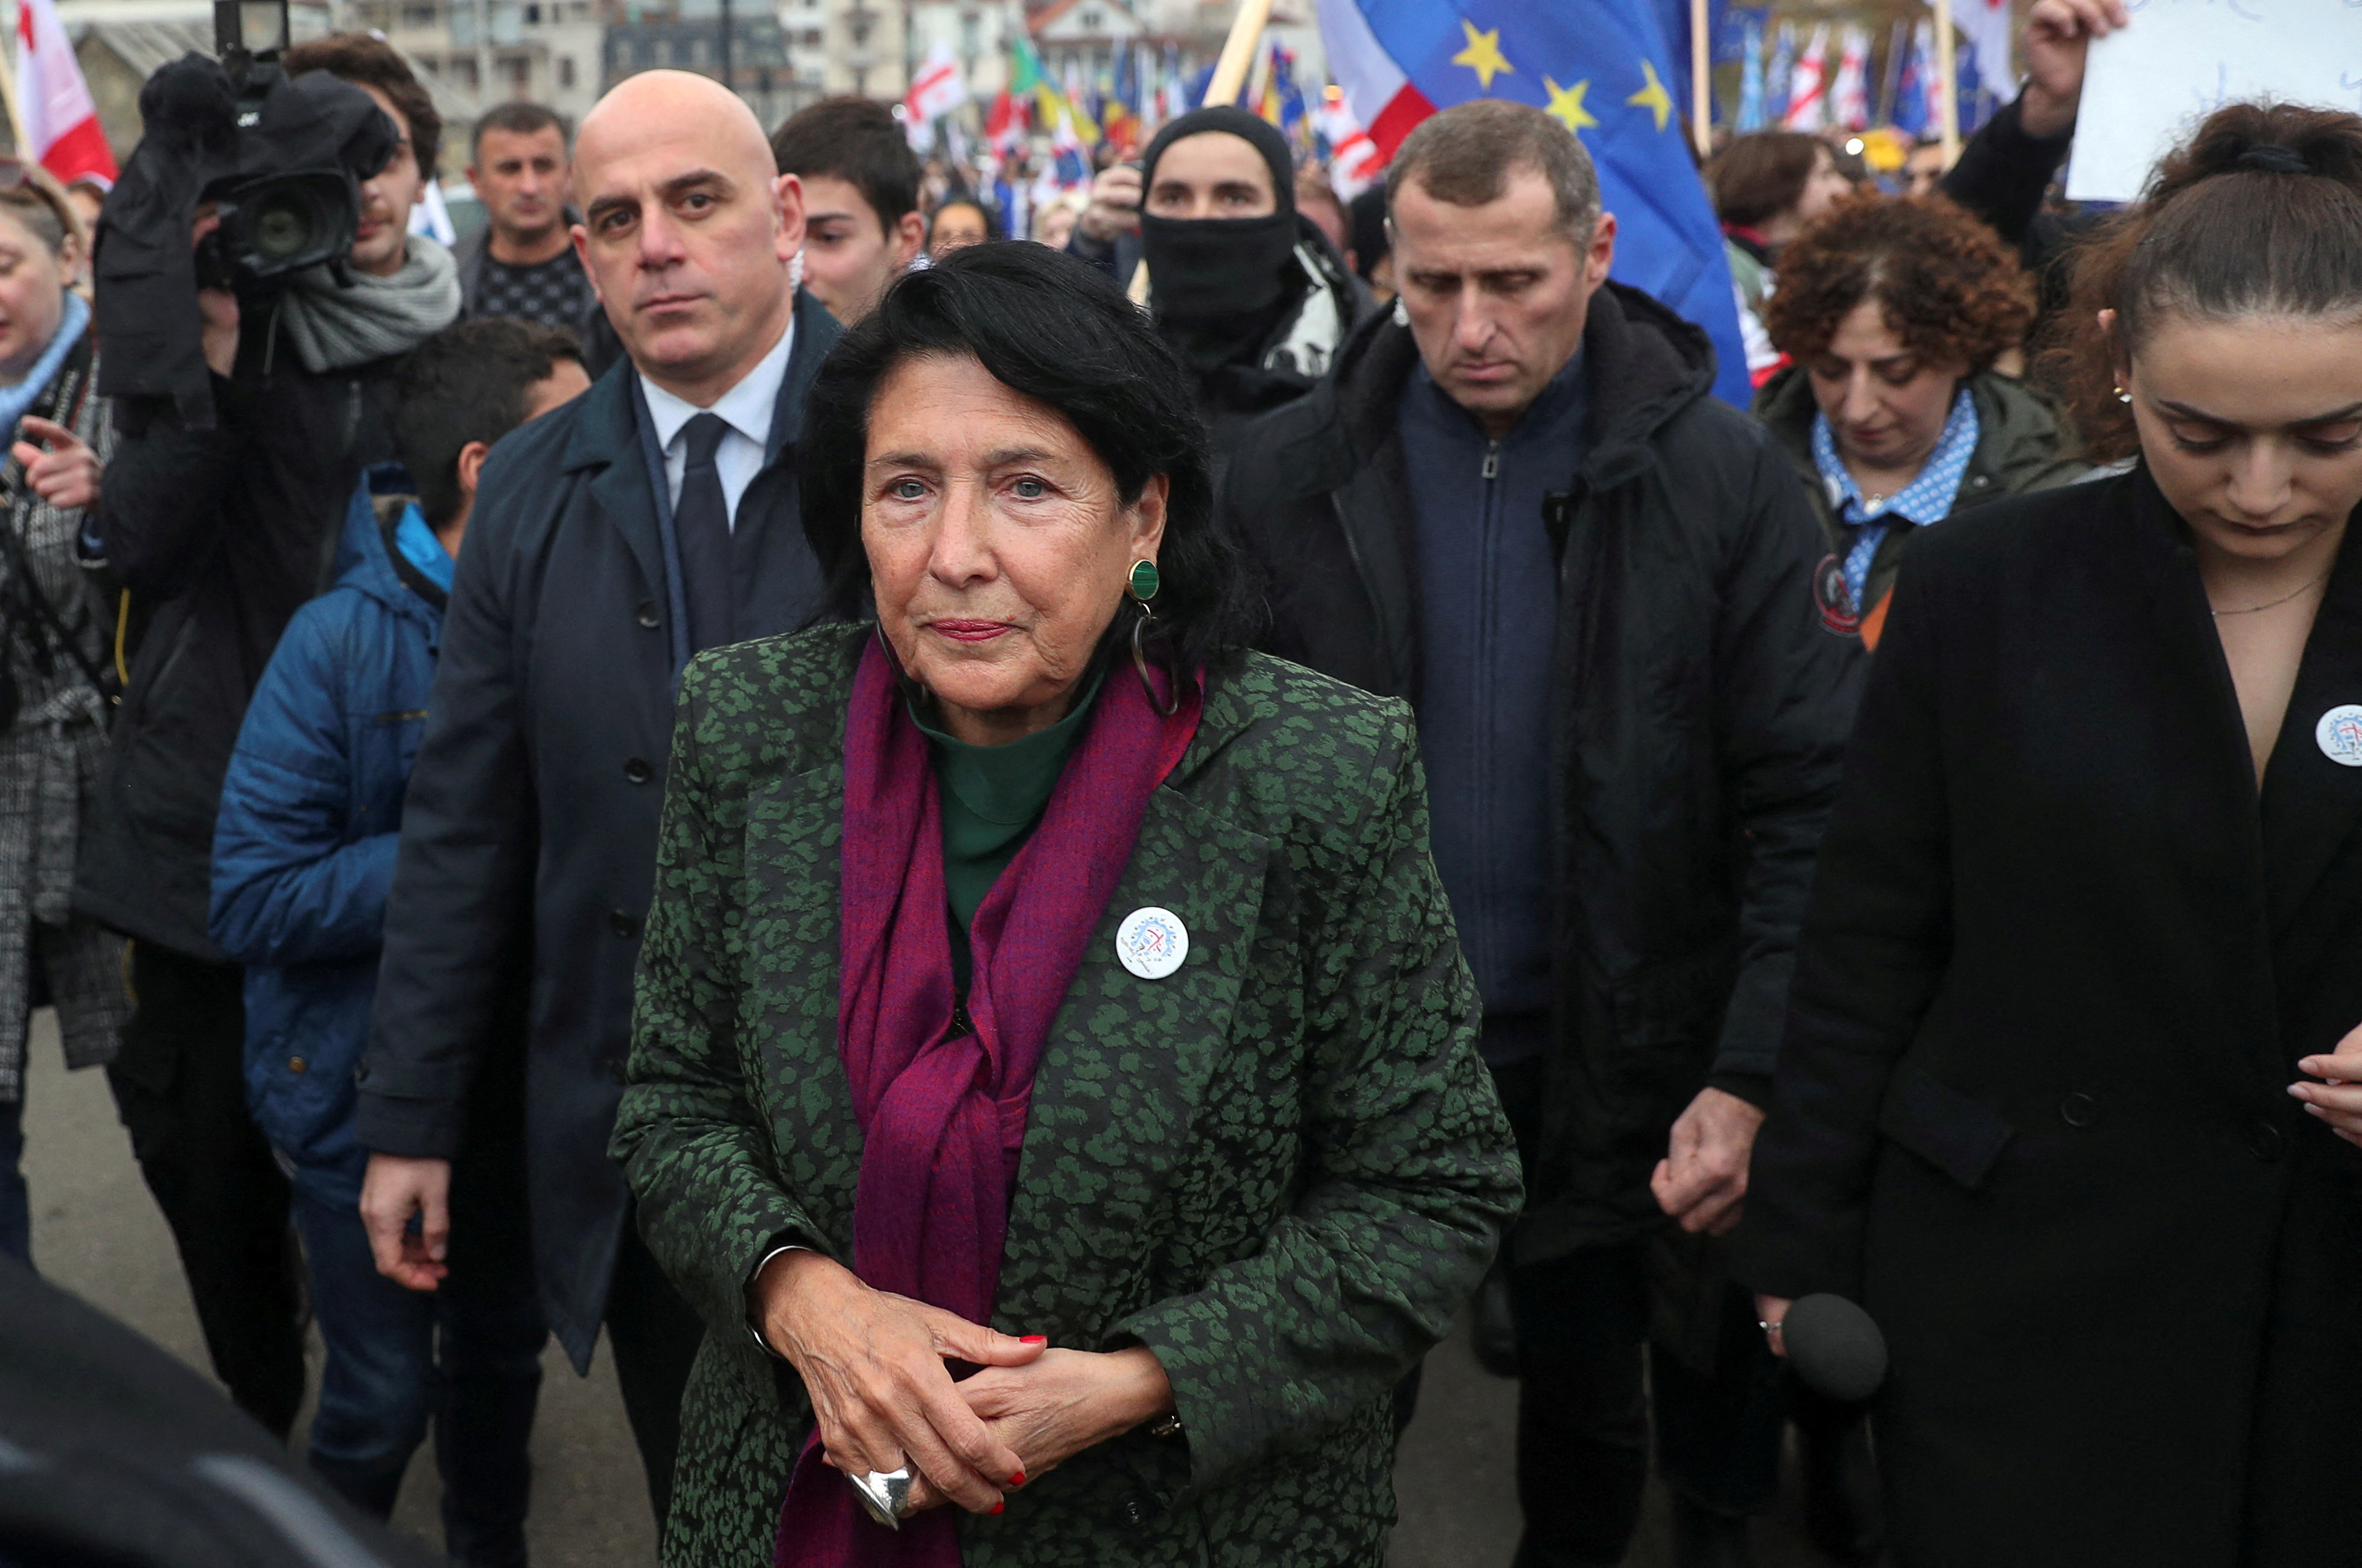 Participants, including Georgia's President Salome Zourabichvili, walk during a procession in support of the country's membership in the European Union in Tbilisi ,